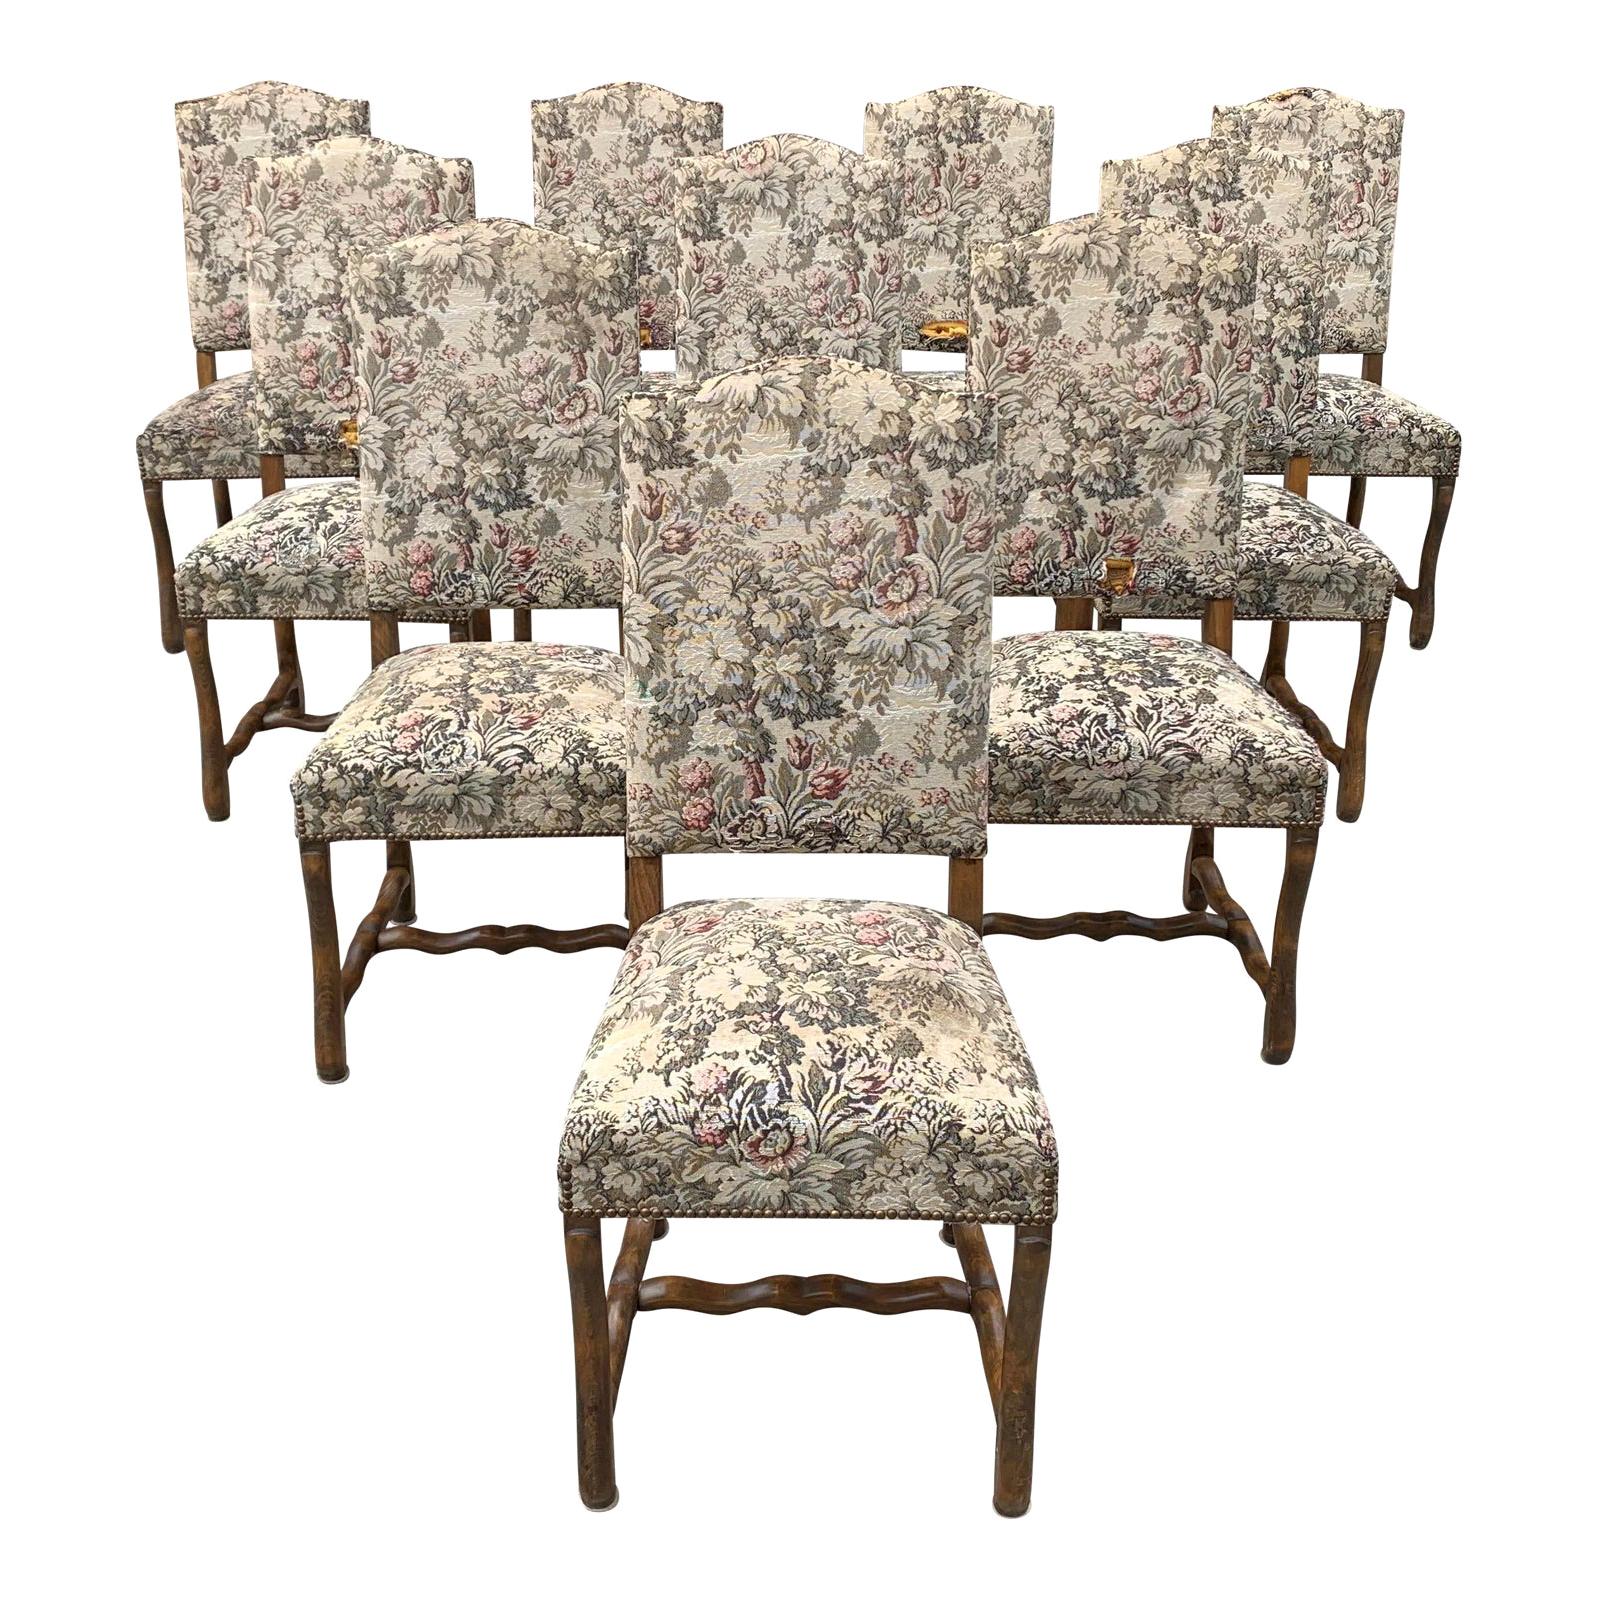 Set of 10 Vintage French Louis XIII Style Os De Mouton Dining Chairs, 1900s For Sale